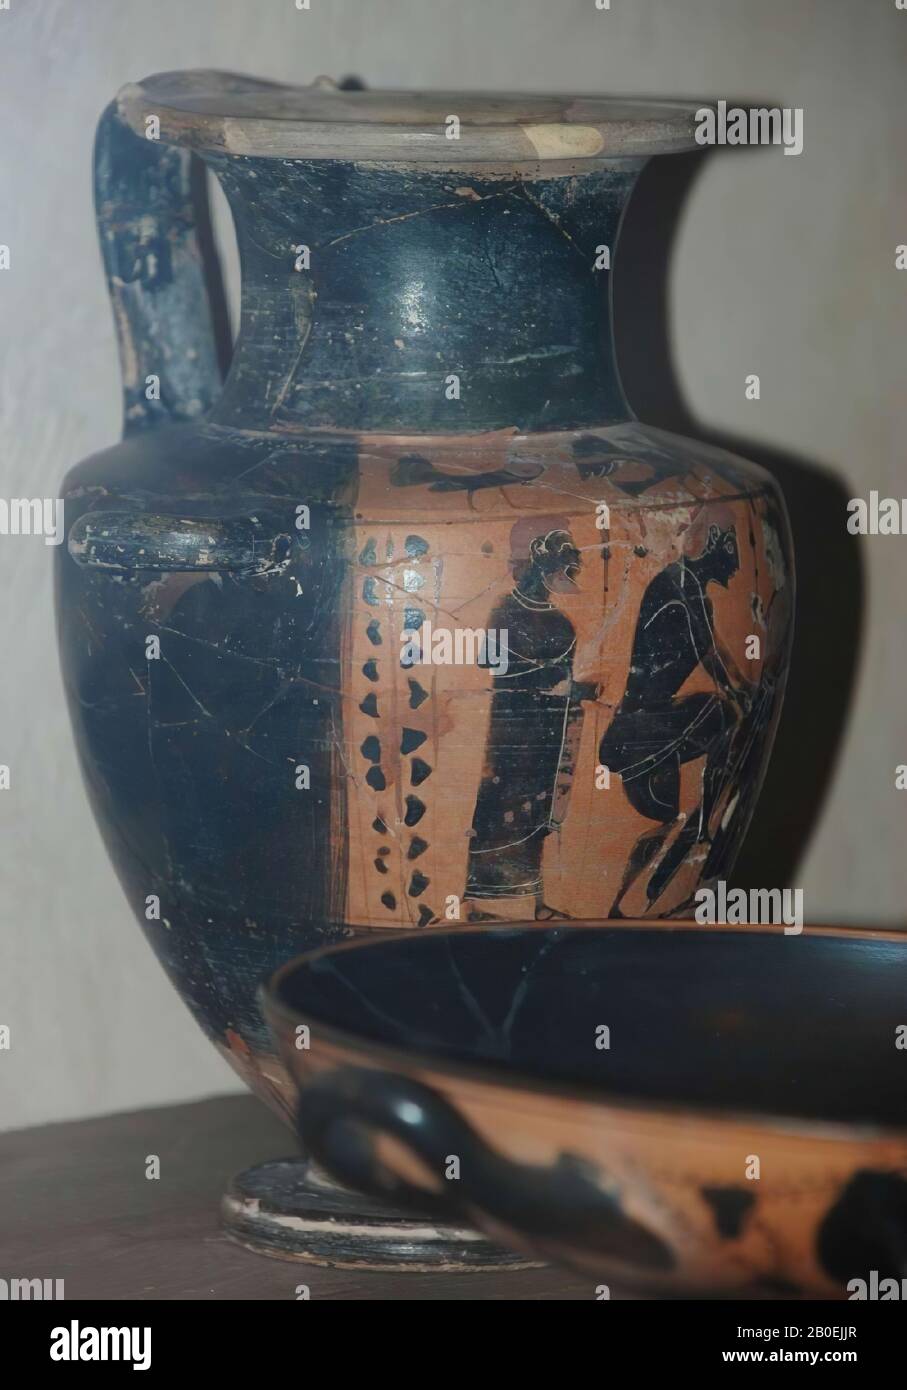 Attic black-figured hydria with decoration on shoulder and belly panel. Shoulder: a siren to the right between two birds. Belly: a hoplite, fighting for battle, between two mantel figures with spears. To his right is the goddess Athena., Vase, hydria, pottery, black-figured, Attic, 24.2 cm, ø 12.3 cm, archaic, black-figured, AttischPainter or Lou -540 Stock Photo